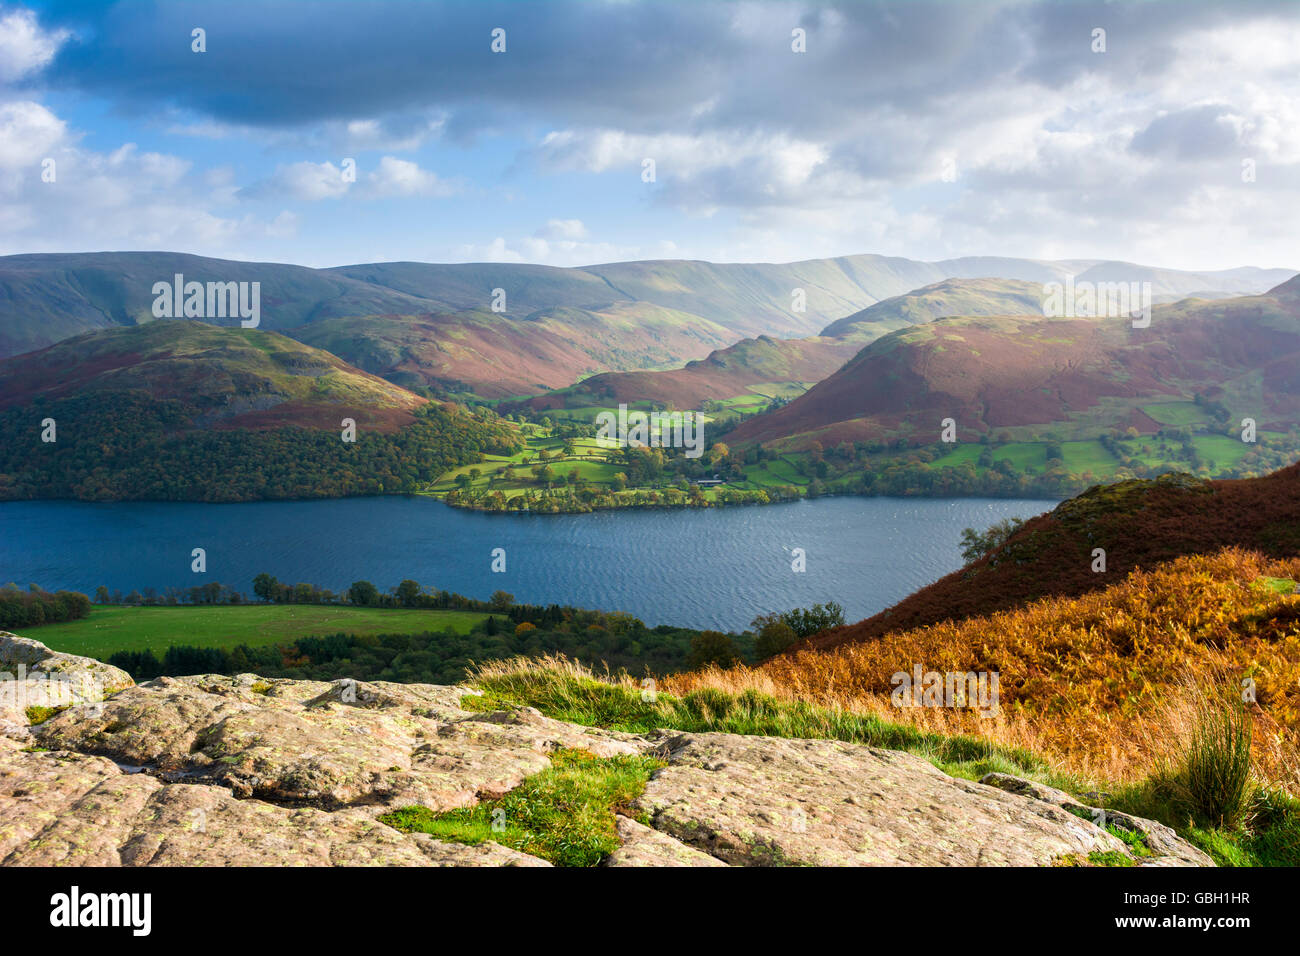 Ullswater, Sandwick Bay and Martindale, viewed from Gowbarrow Fell in the Lake District Park, Cumbria, England. Stock Photo